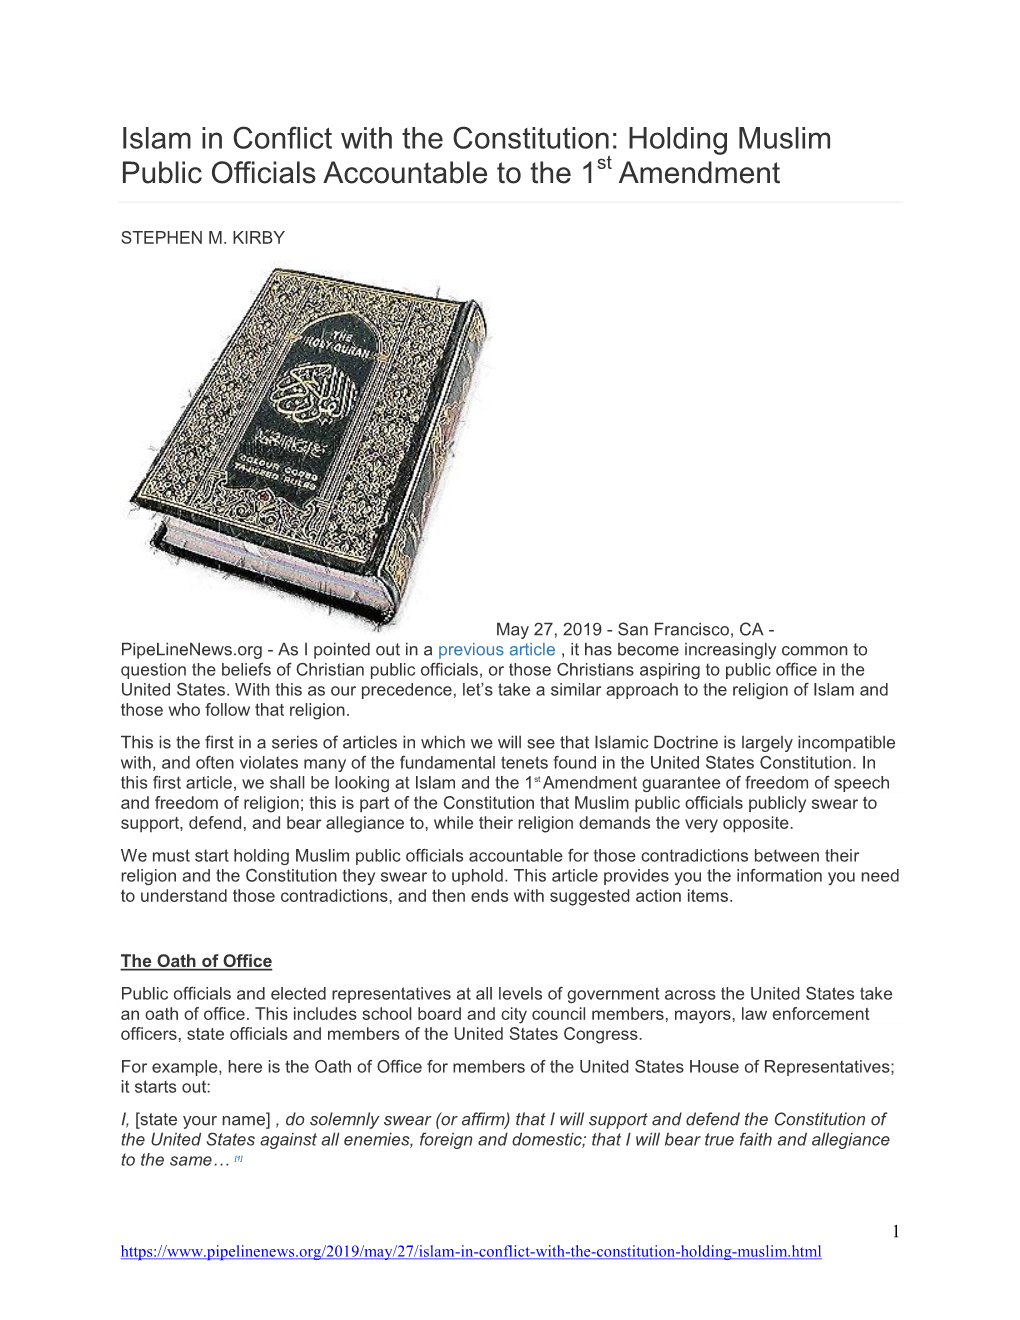 Islam in Conflict with the Constitution: Holding Muslim Public Officials Accountable to the 1St Amendment